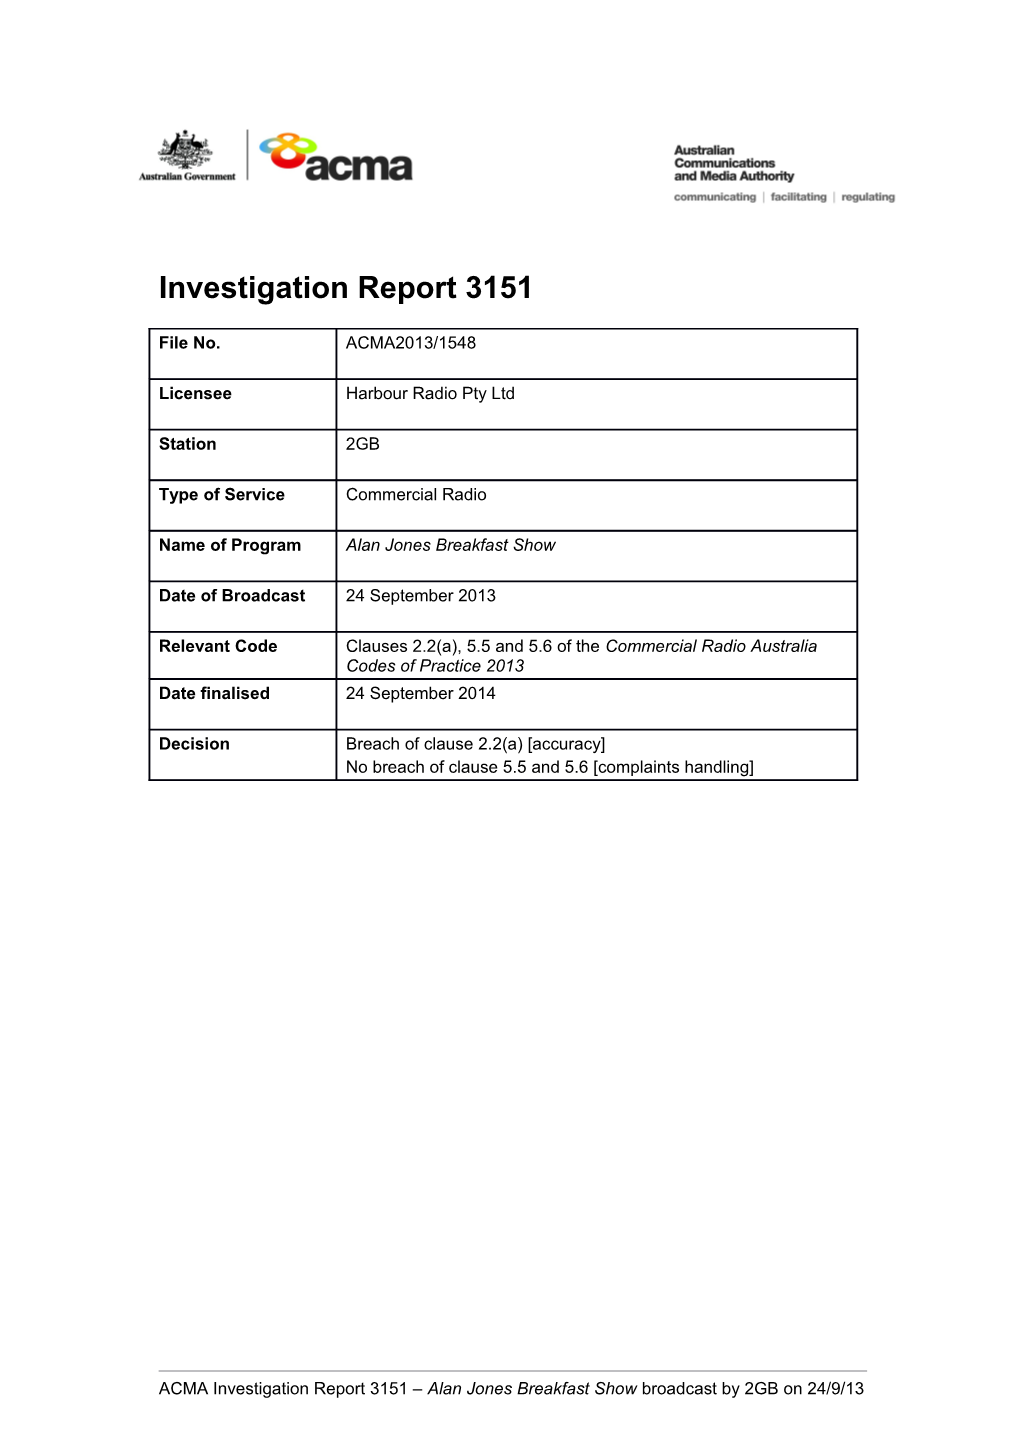 Investigation Under Section 170 of the BSA